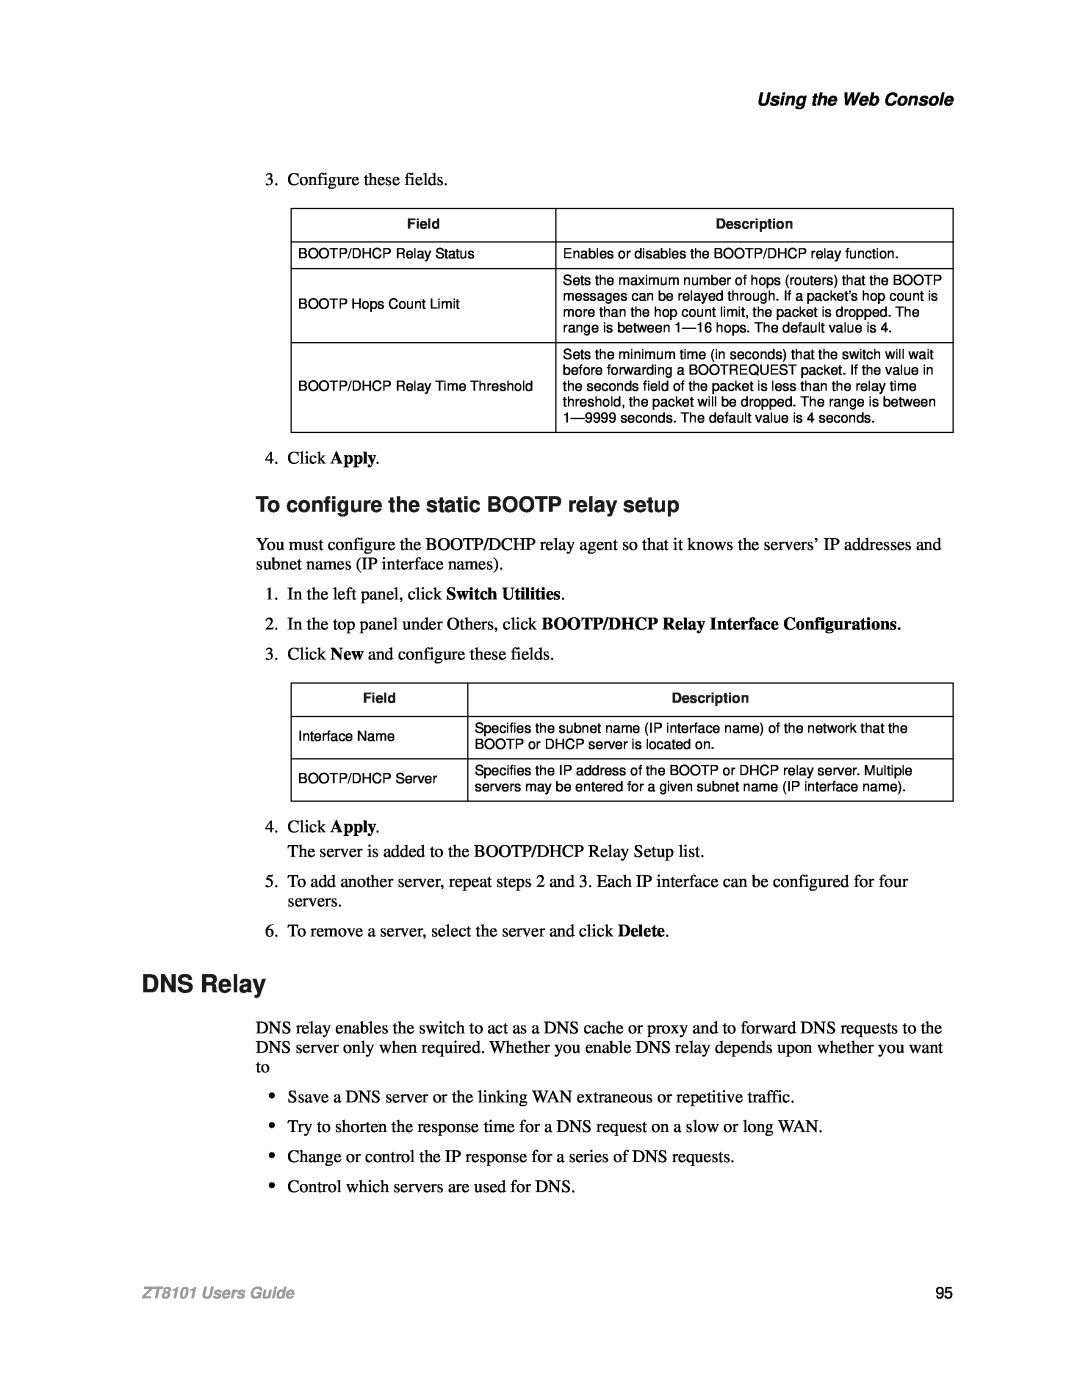 Intel ZT8101 user manual To configure the static BOOTP relay setup, DNS Relay, Using the Web Console 